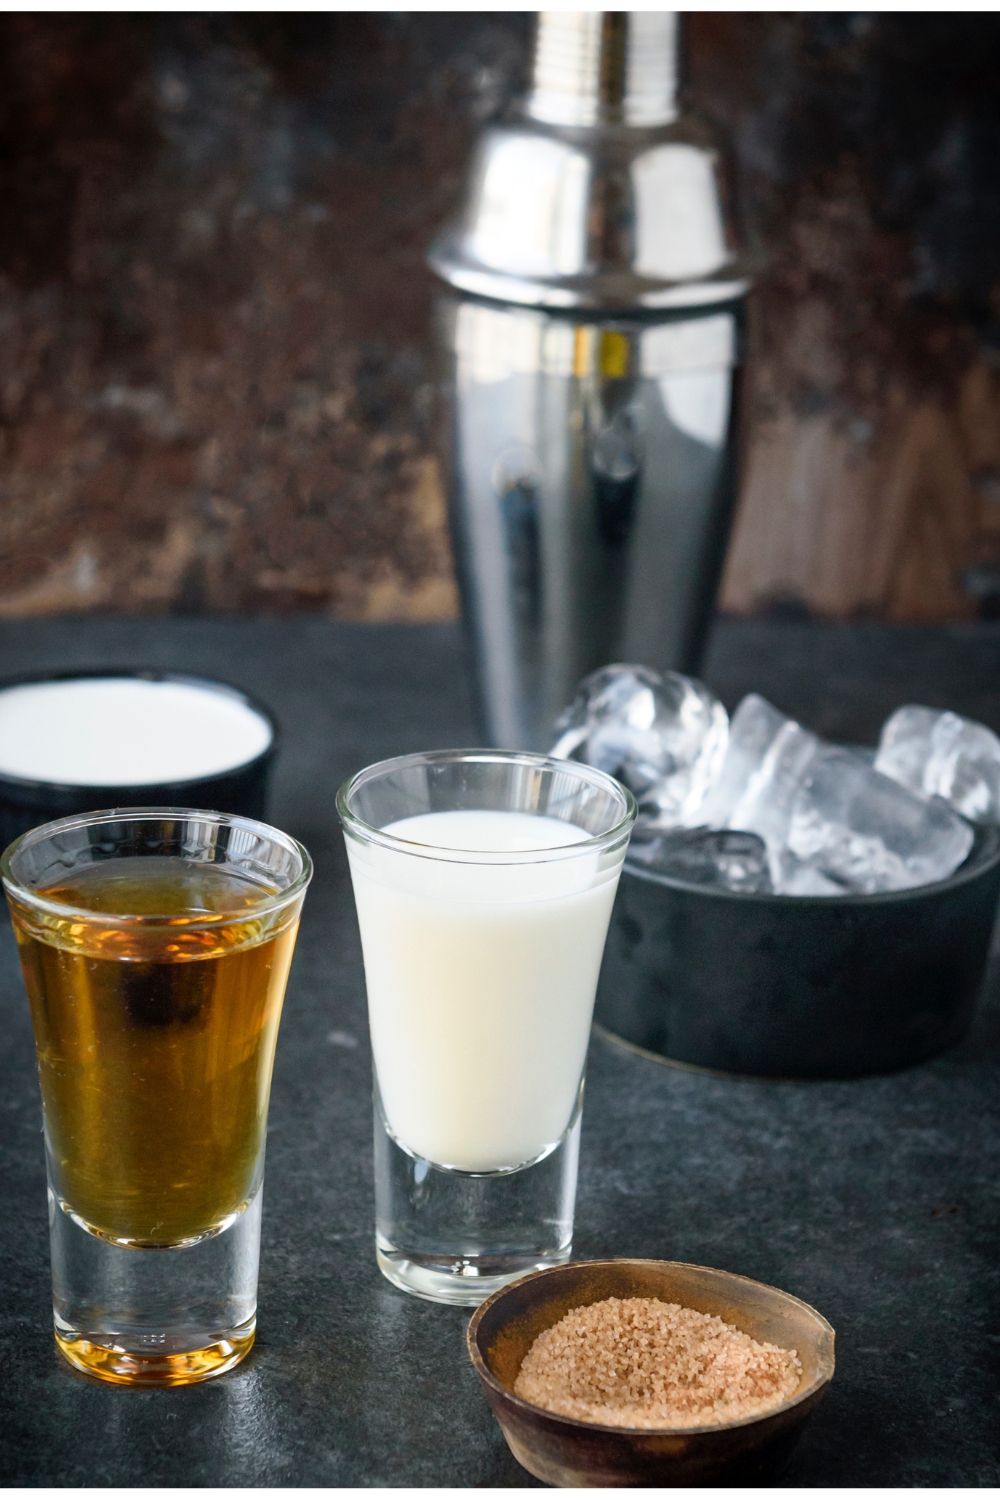 A metal shaker, ice, a shot glass full of Rumchata, a shot glass of fireball, and a small bowl of cinnamon and sugar mixture sit on a black countertop.